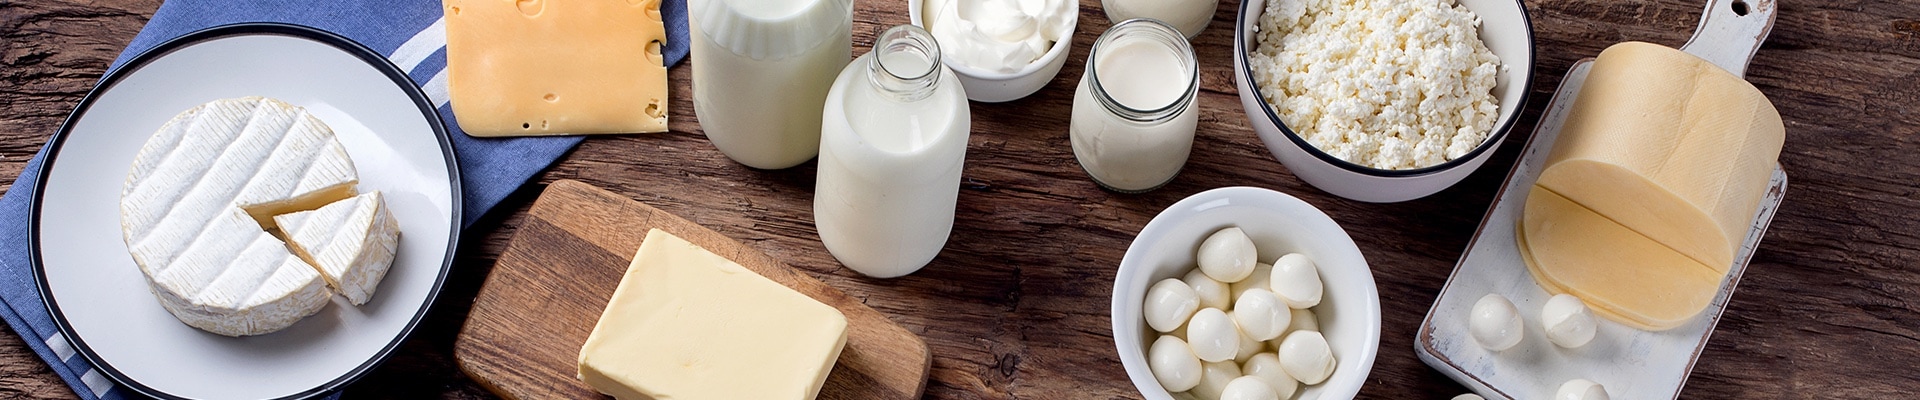 Let's Celebrate Wisconsin Dairy Month! - Rural Mutual Insurance Company